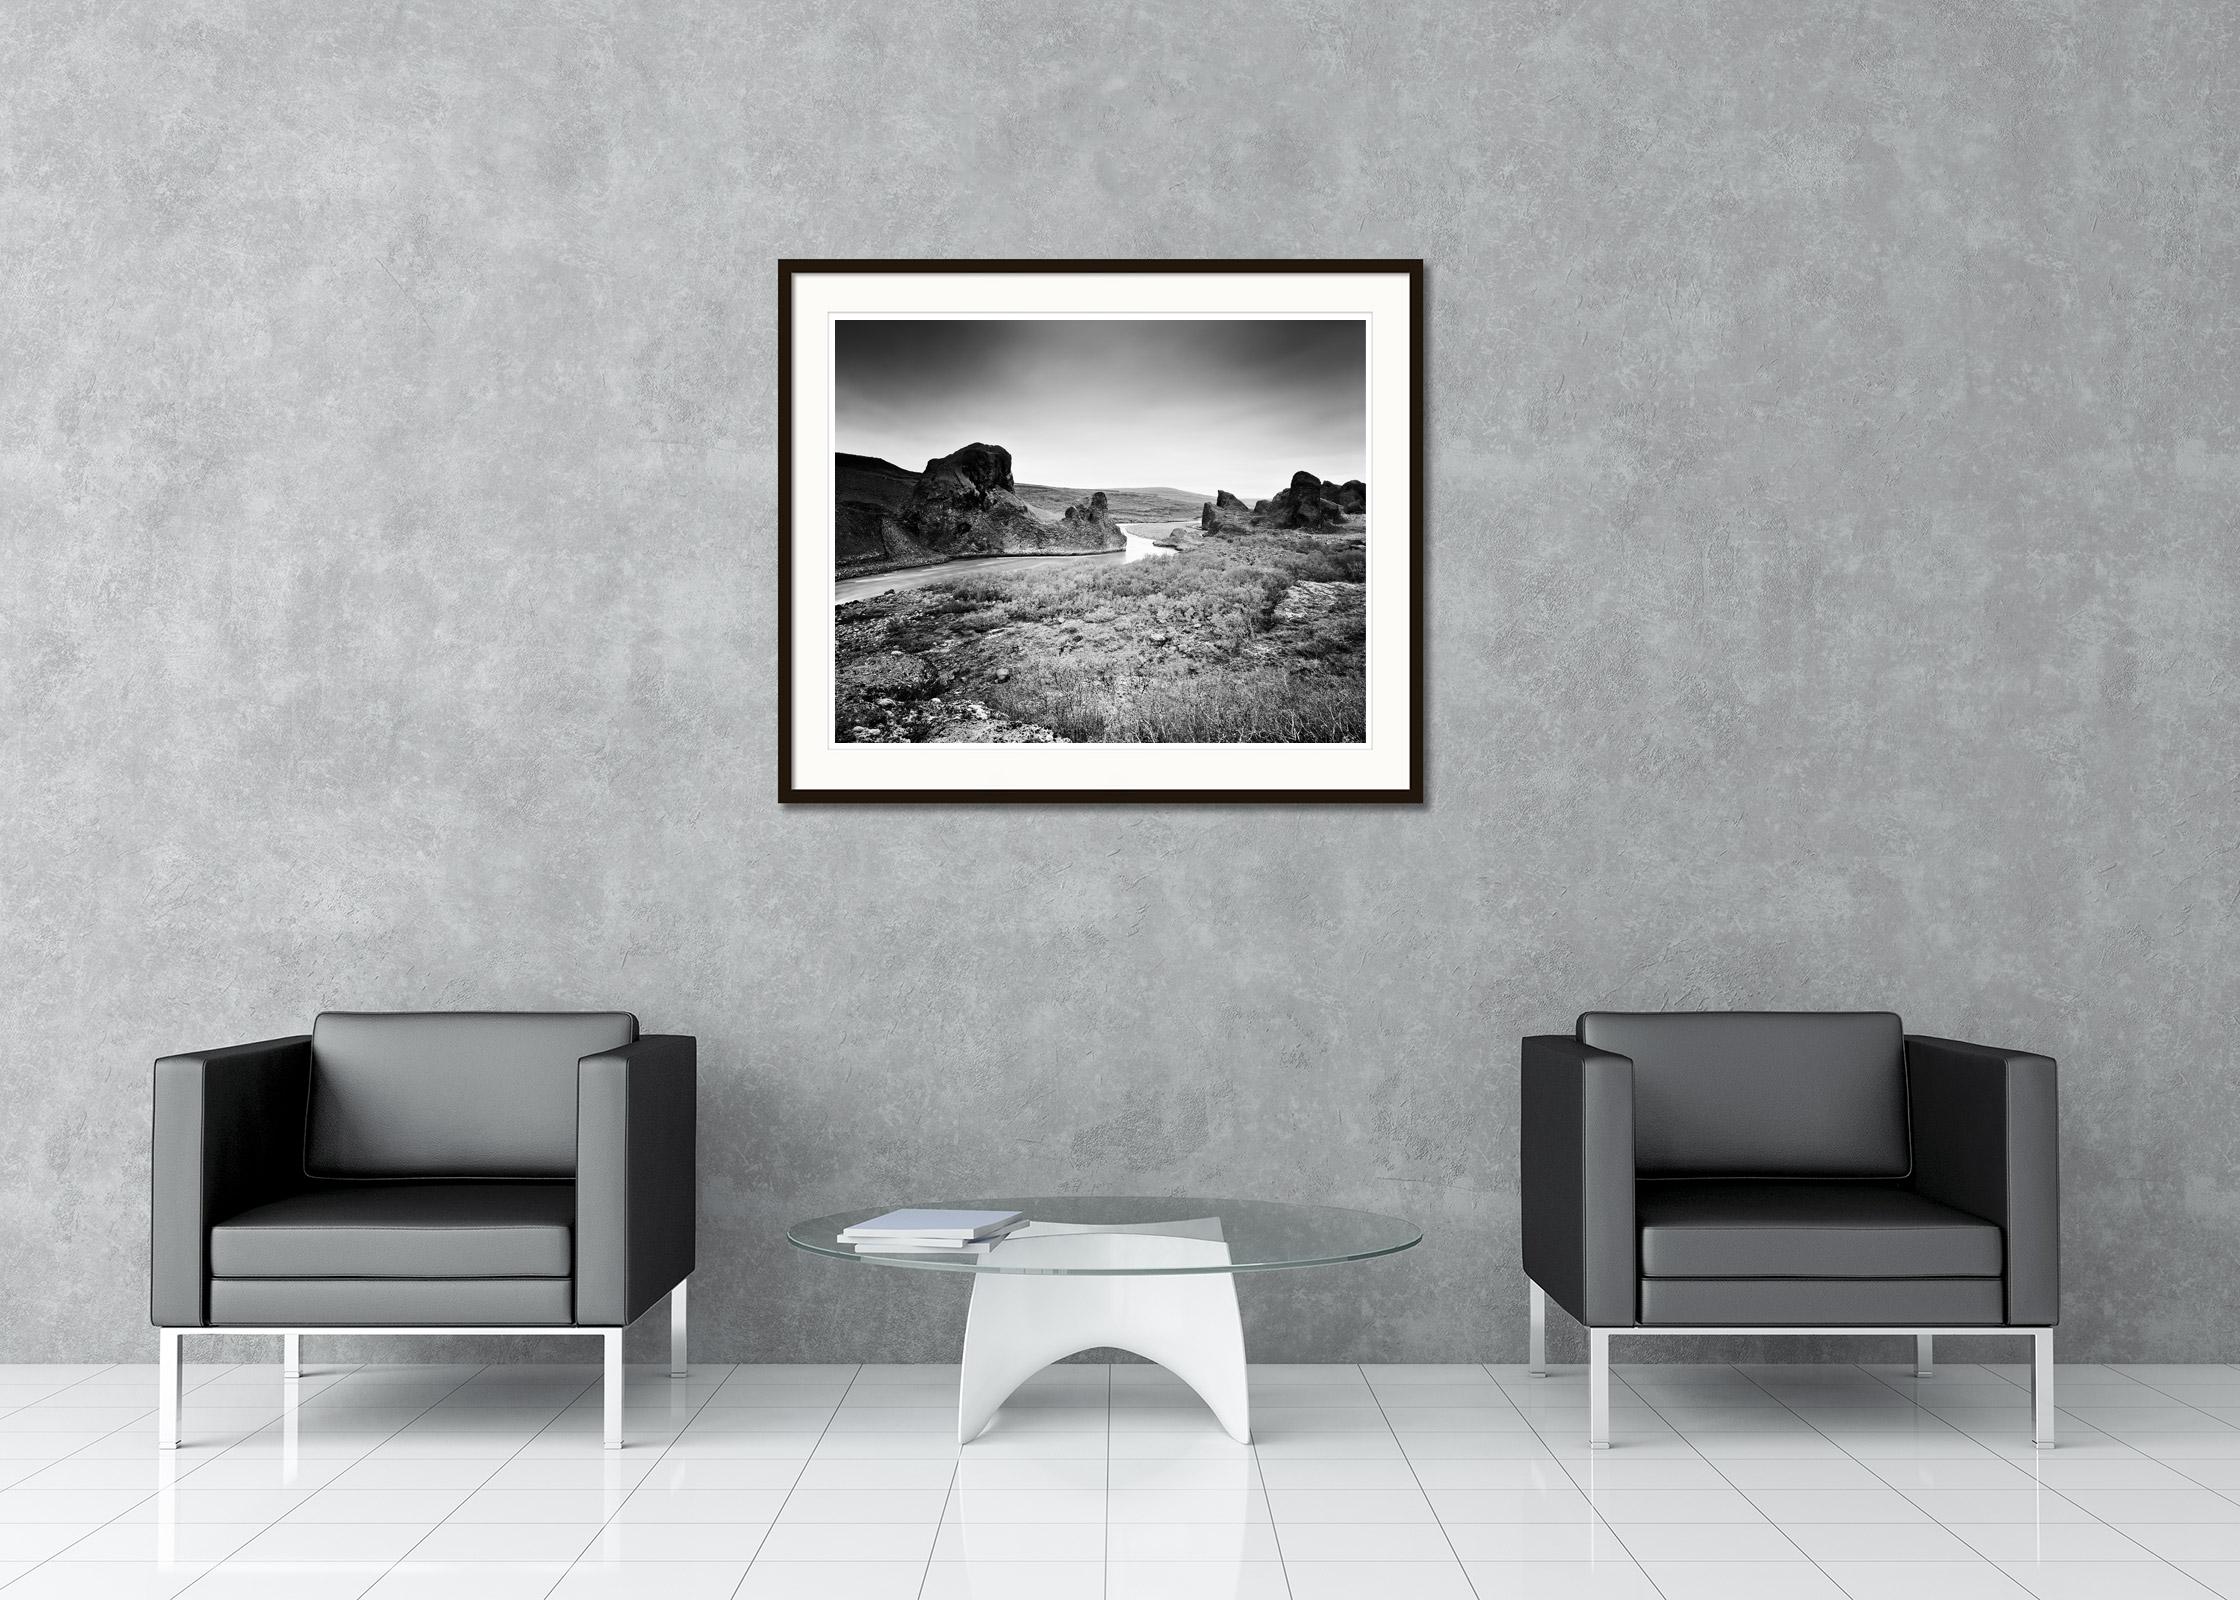 Black and white fine art long exposure landscape - waterscape photography. Archival pigment ink print, edition of 5. Signed, titled, dated and numbered by artist. Certificate of authenticity included. Printed with 4cm white border.
International